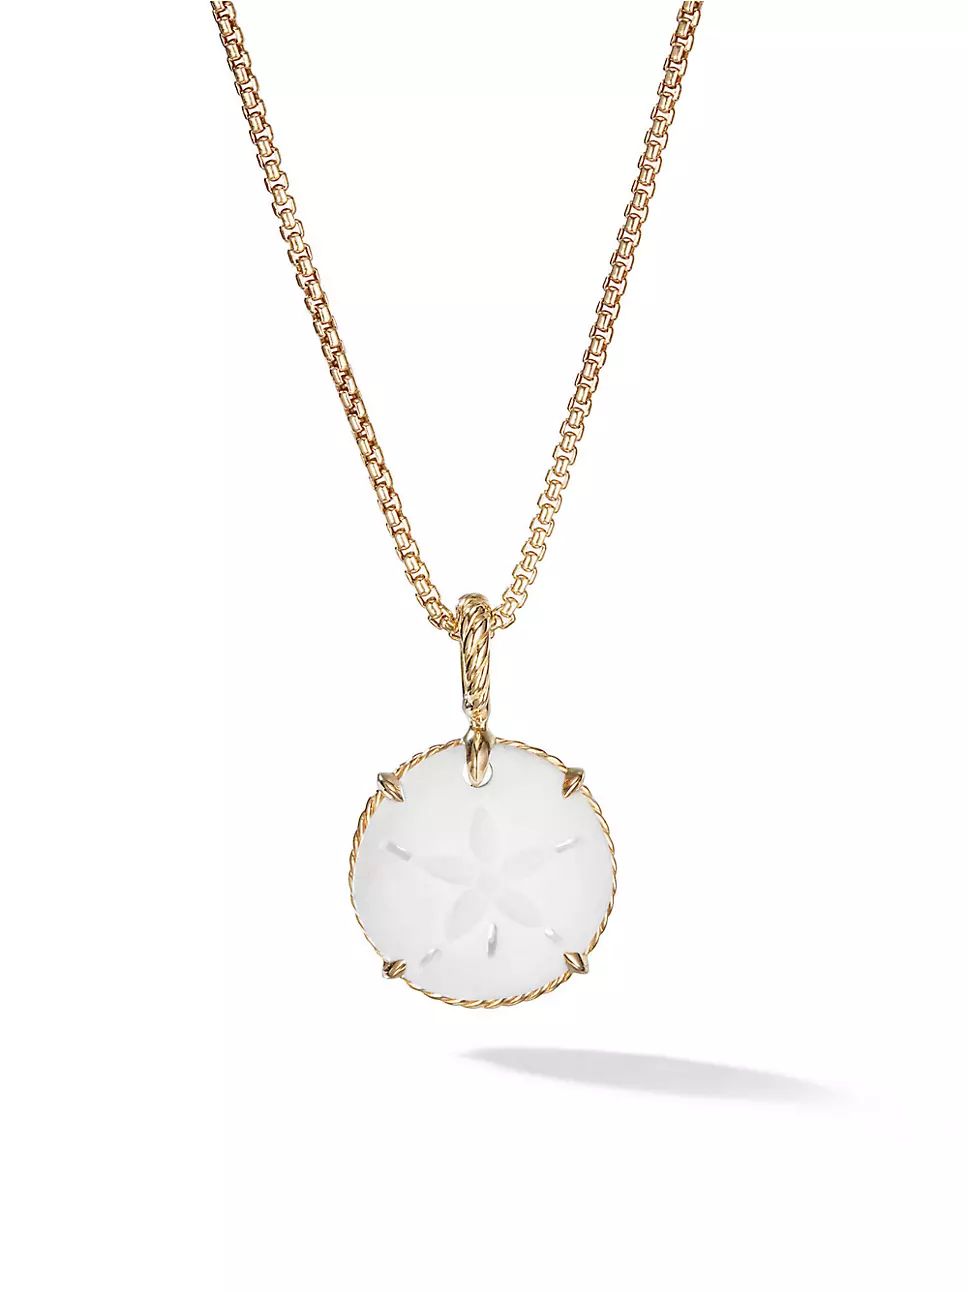 Sand Dollar Amulet with White Agate and 18K Yellow Gold | Saks Fifth Avenue